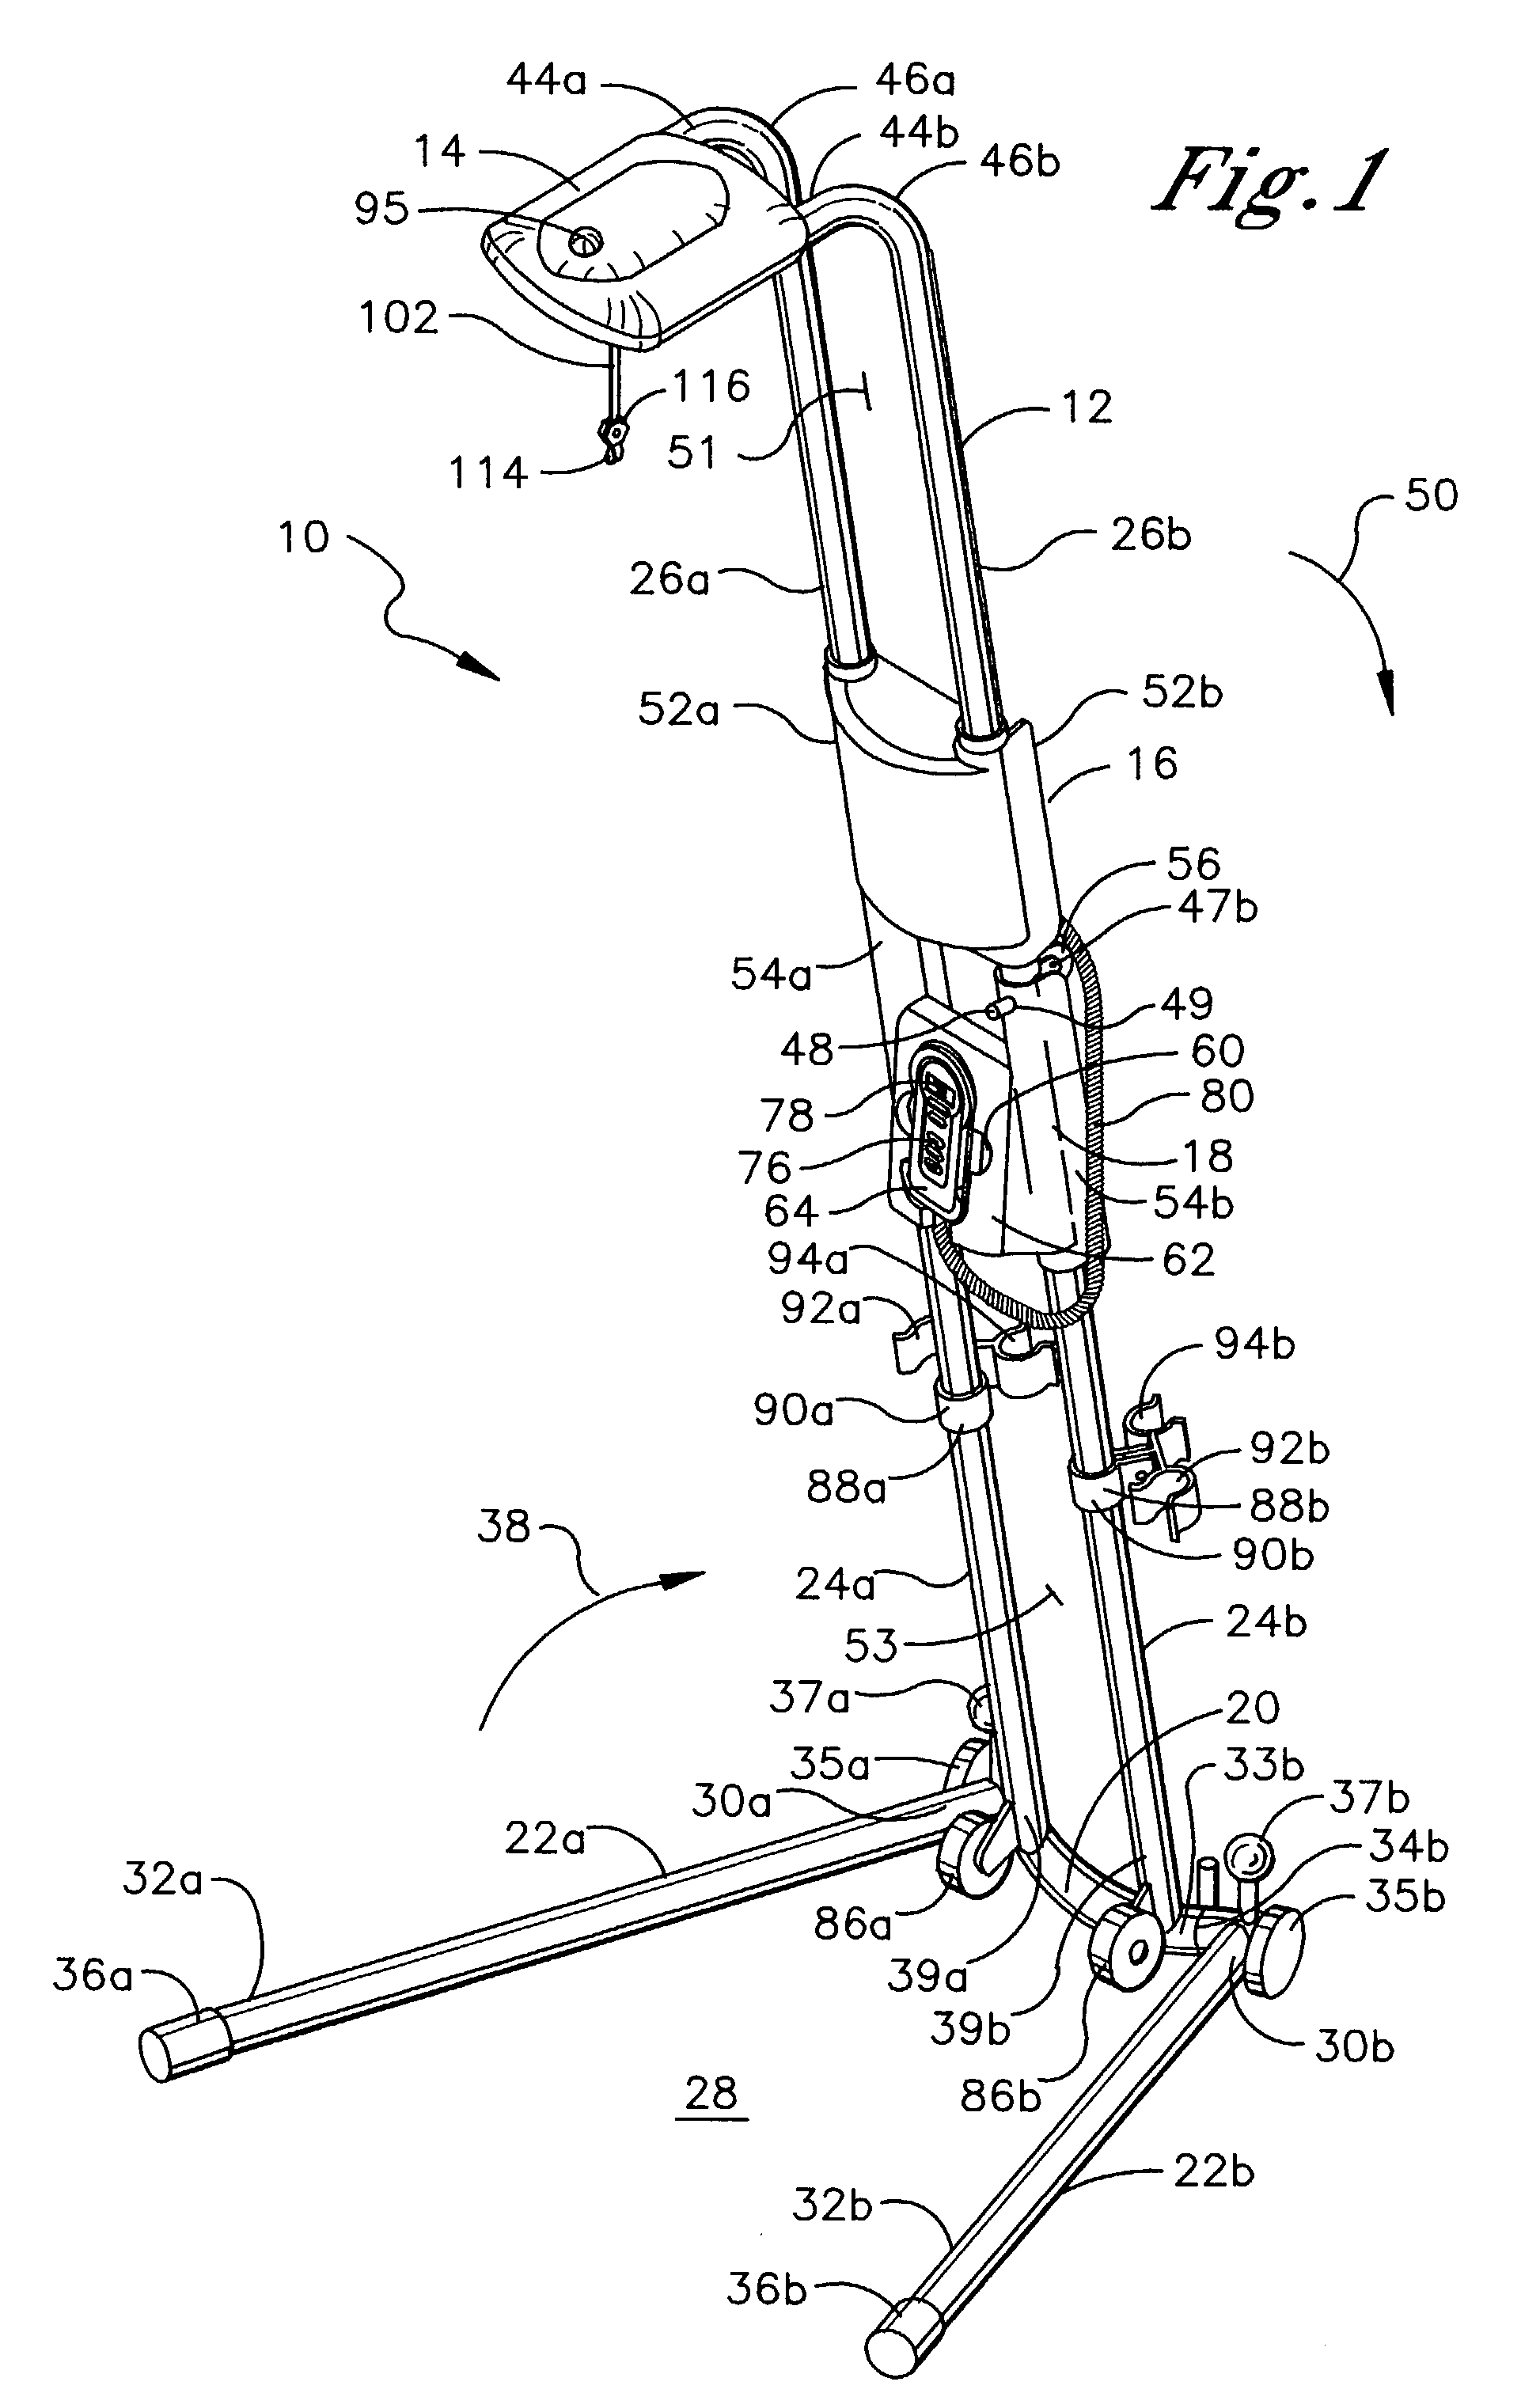 Continuous passive motion device for rehabilitation of the elbow or shoulder